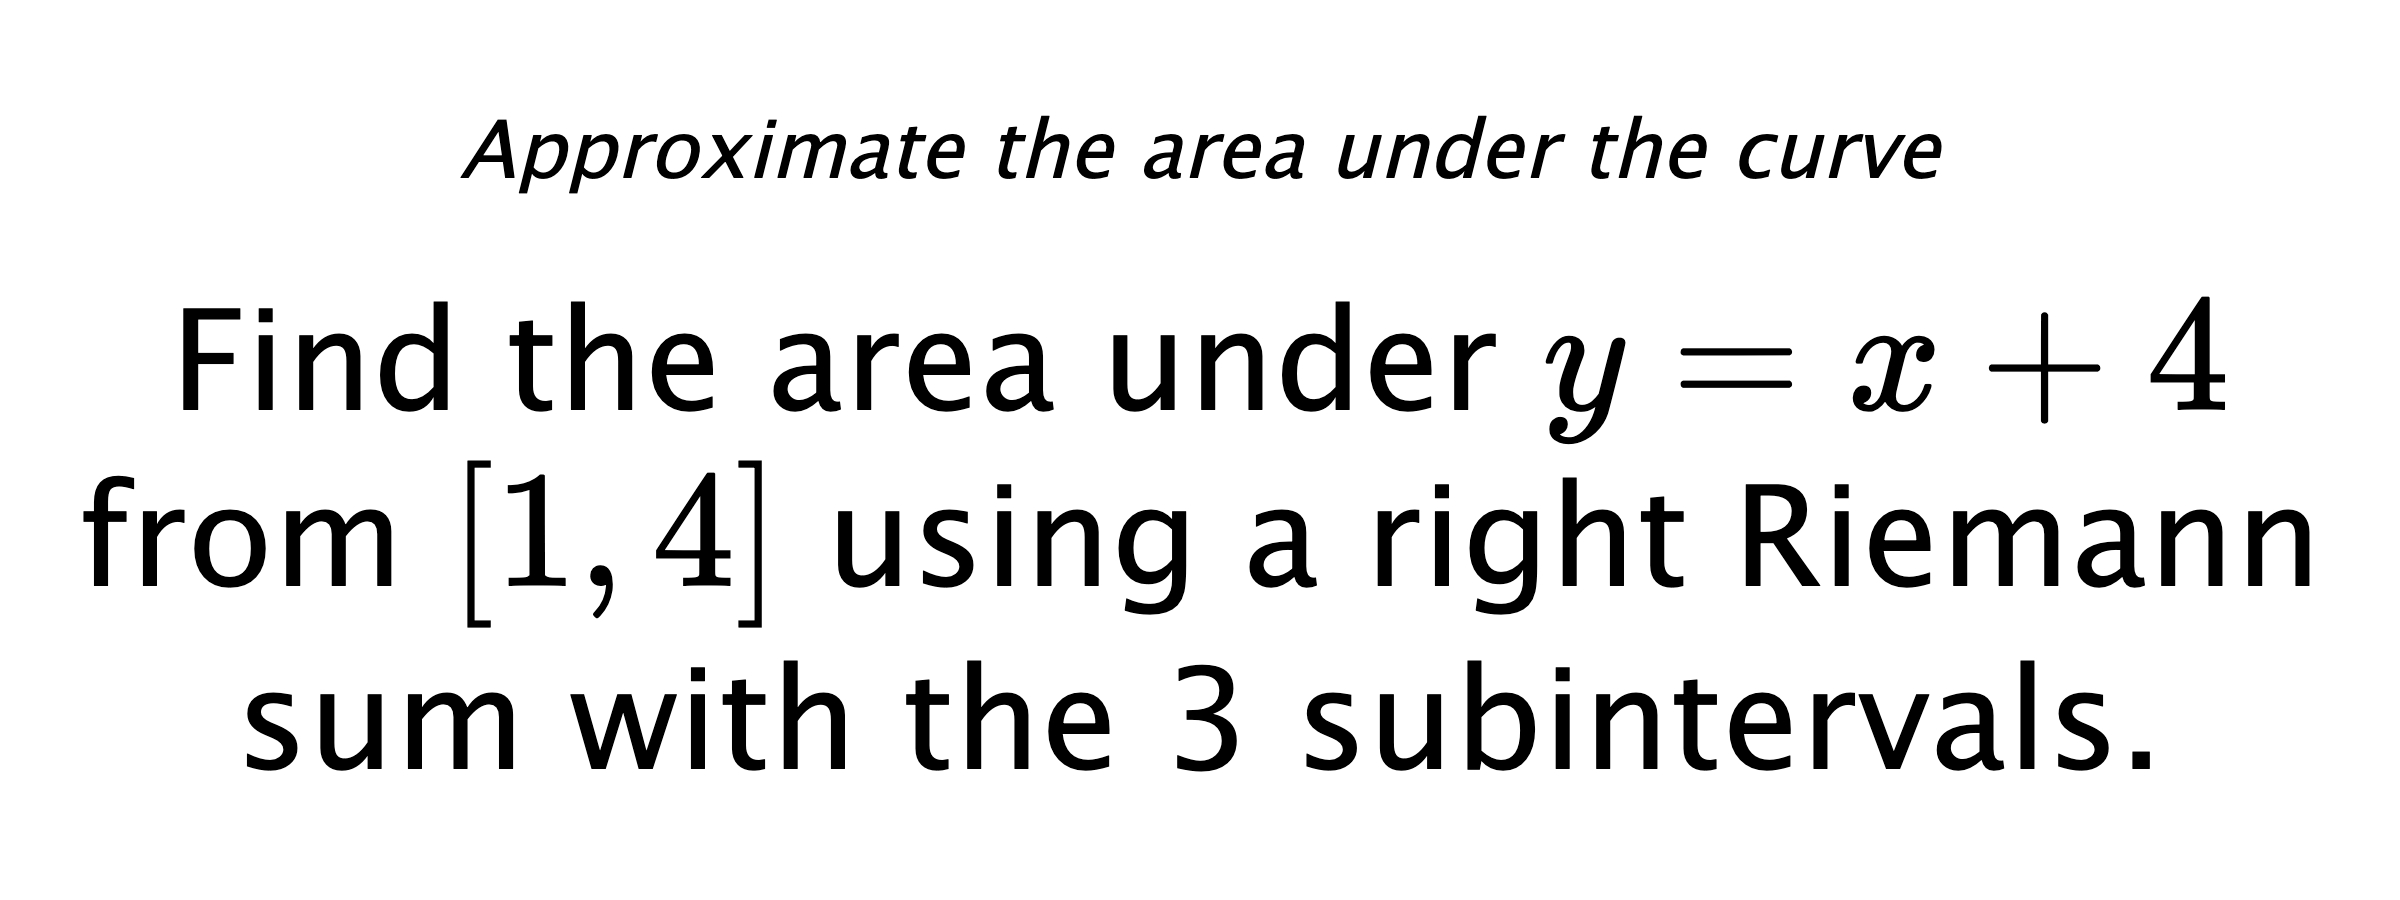 Approximate the area under the curve Find the area under $ y=x+4 $ from $ [1,4] $ using a right Riemann sum with the 3 subintervals.